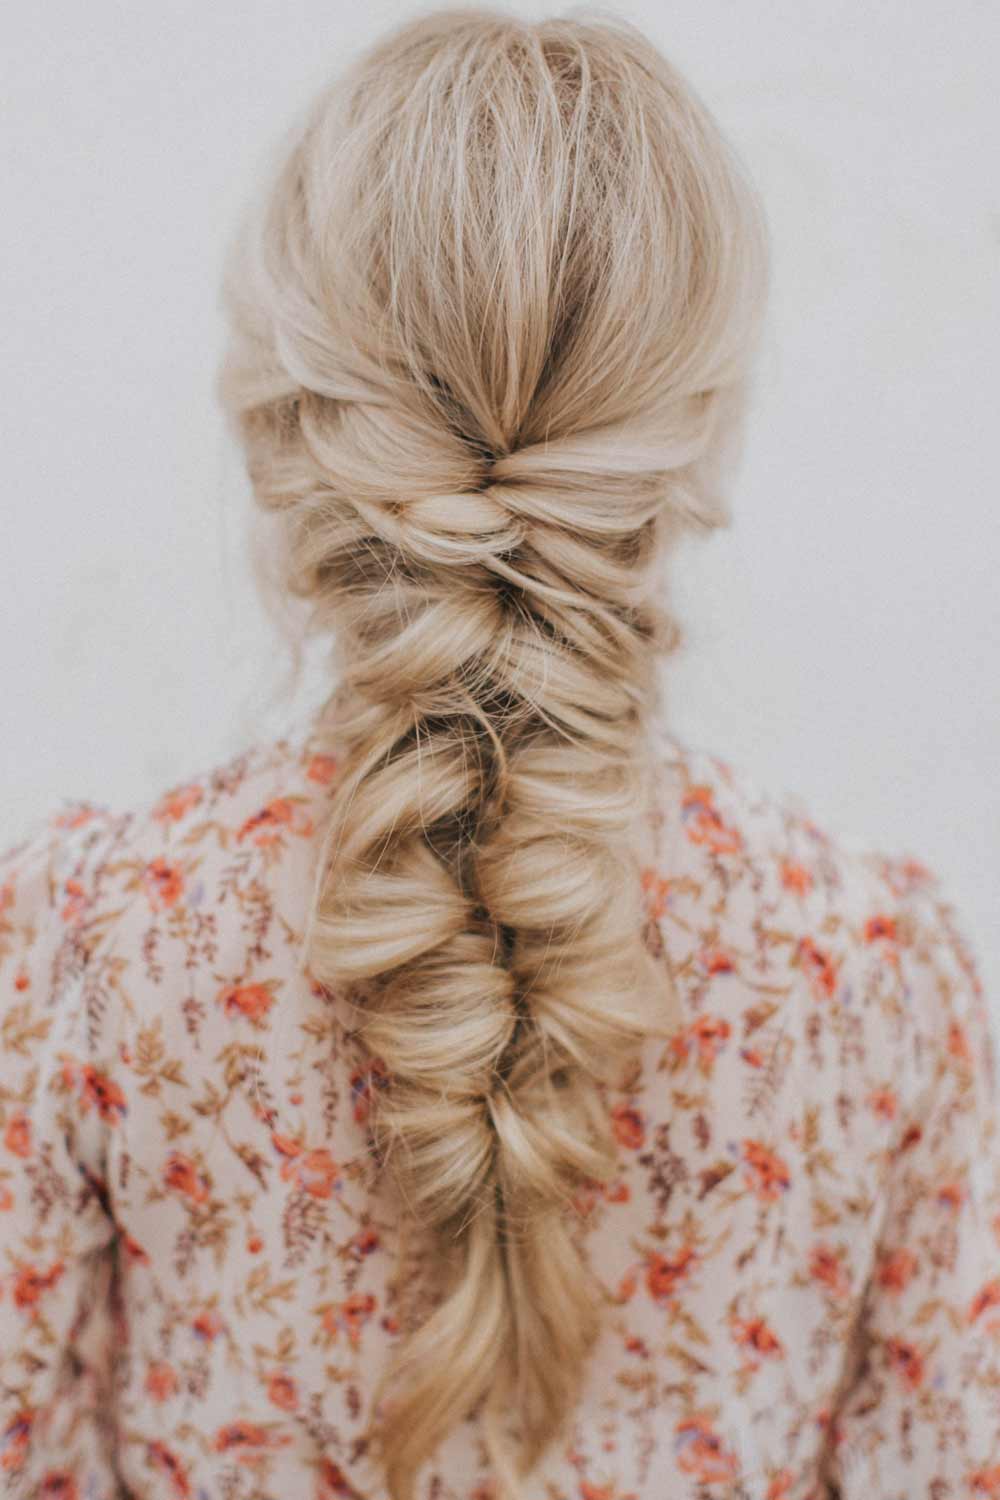 The History and Origin of Braids